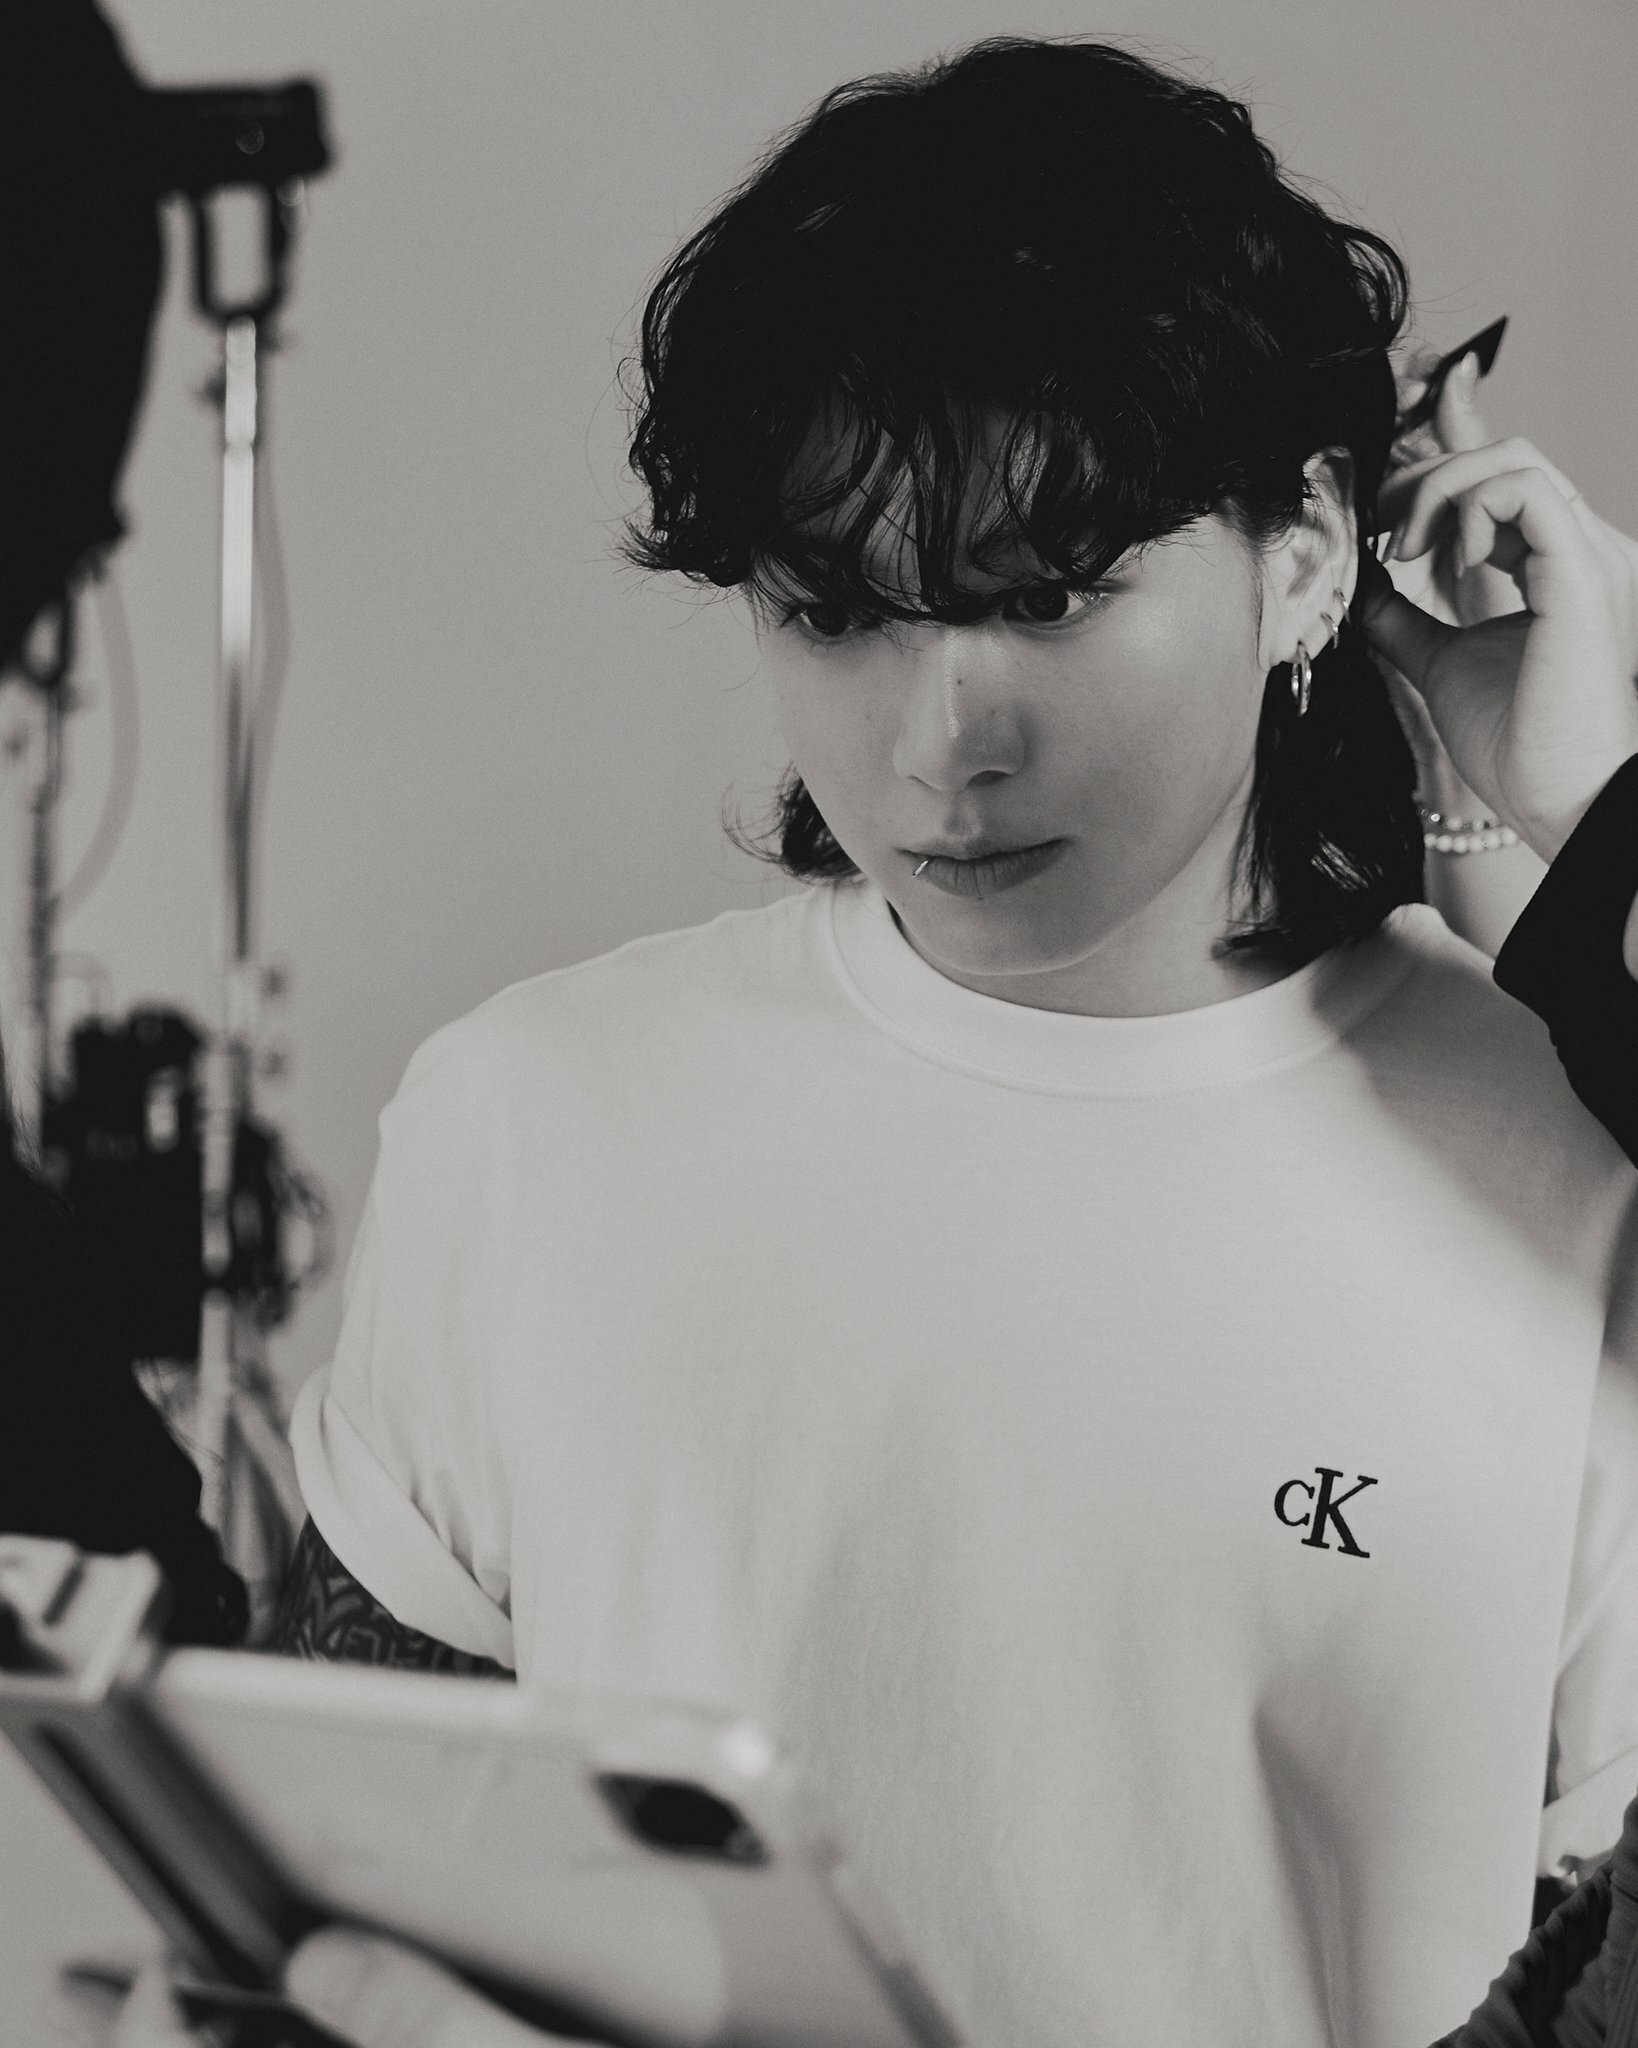 BTS's Jungkook's Calvin Klein Campaign: See 3 Exclusive Behind-the-Scenes  Photos from the Shoot